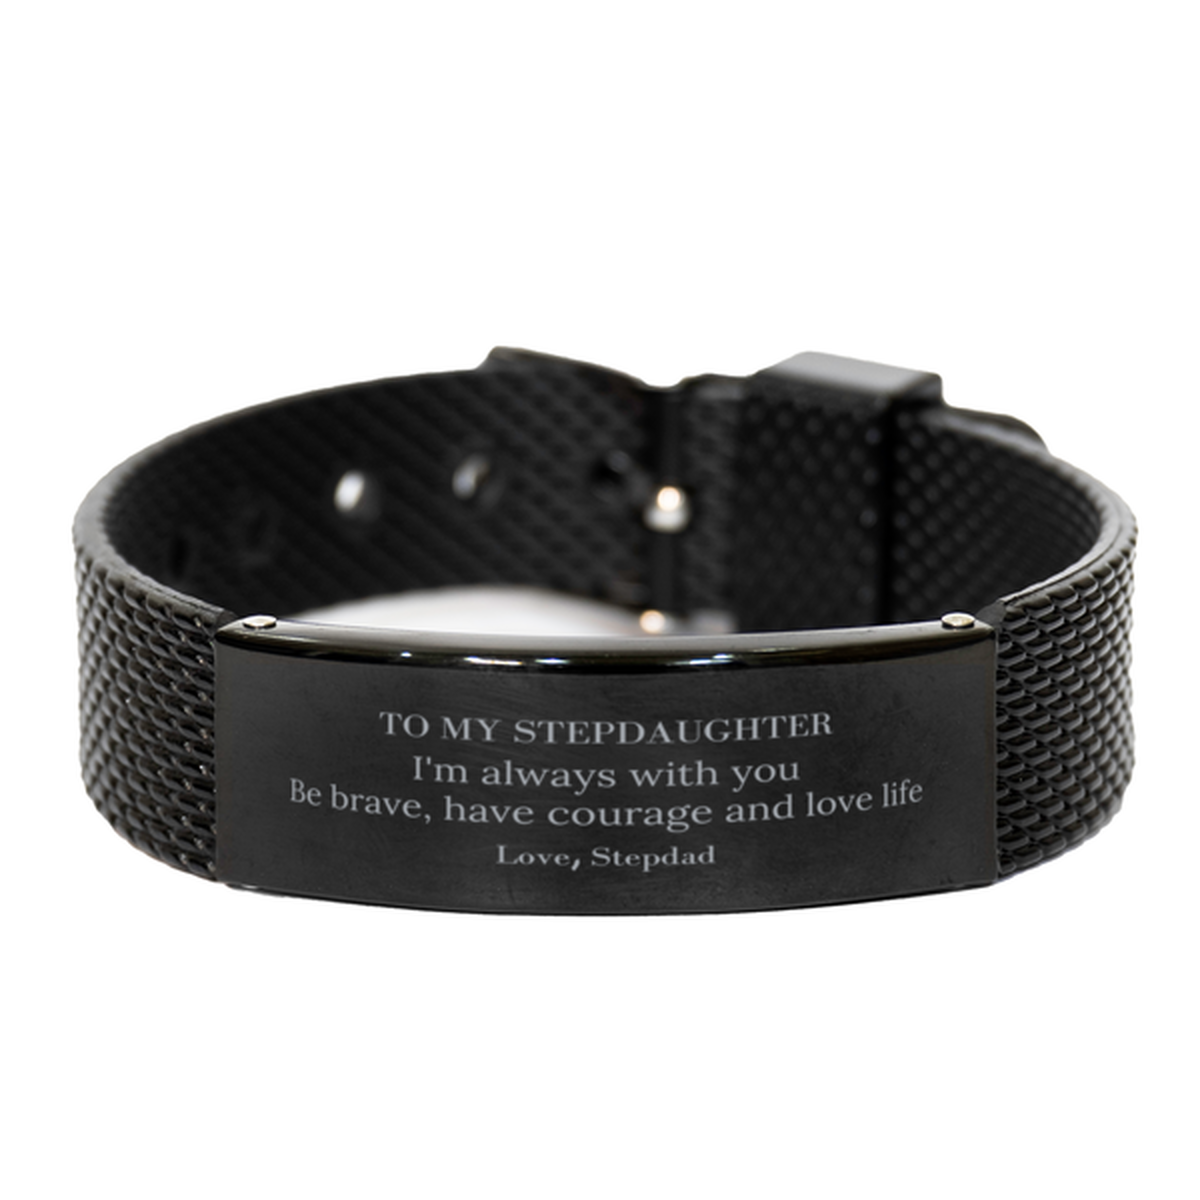 To My Stepdaughter Gifts from Stepdad, Unique Black Shark Mesh Bracelet Inspirational Christmas Birthday Graduation Gifts for Stepdaughter I'm always with you. Be brave, have courage and love life. Love, Stepdad